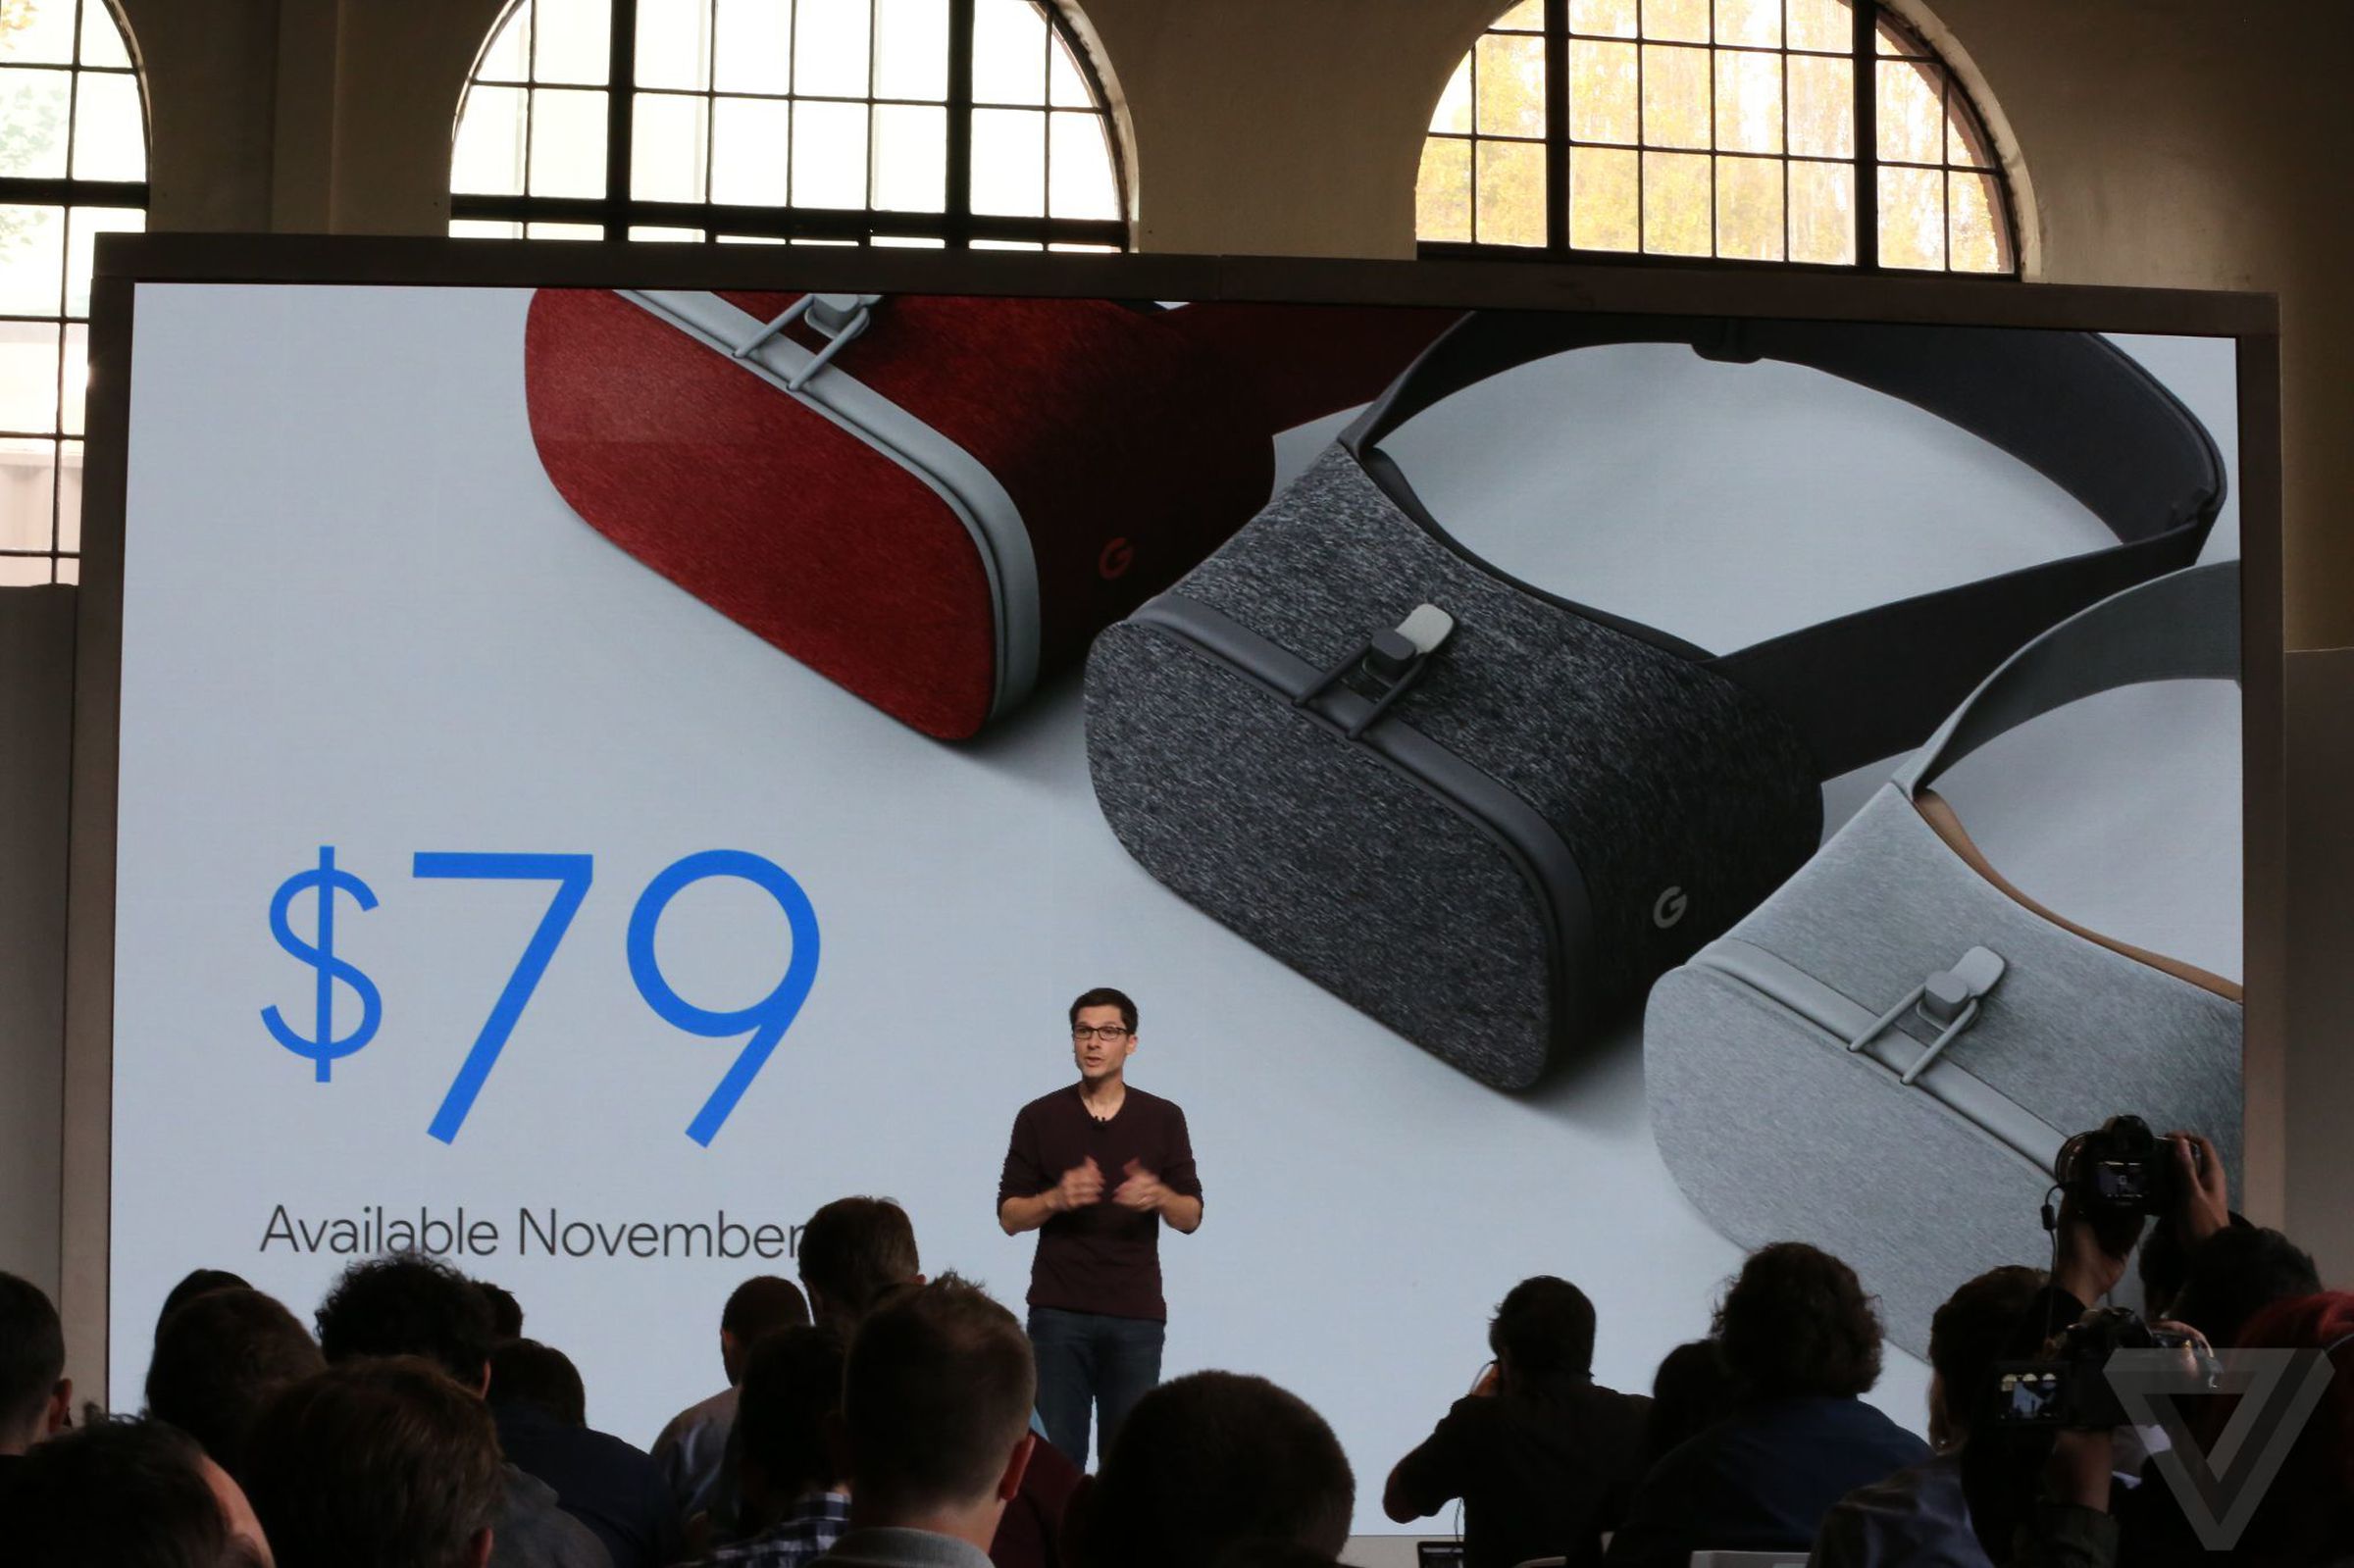 Google's Daydream VR headset and controller